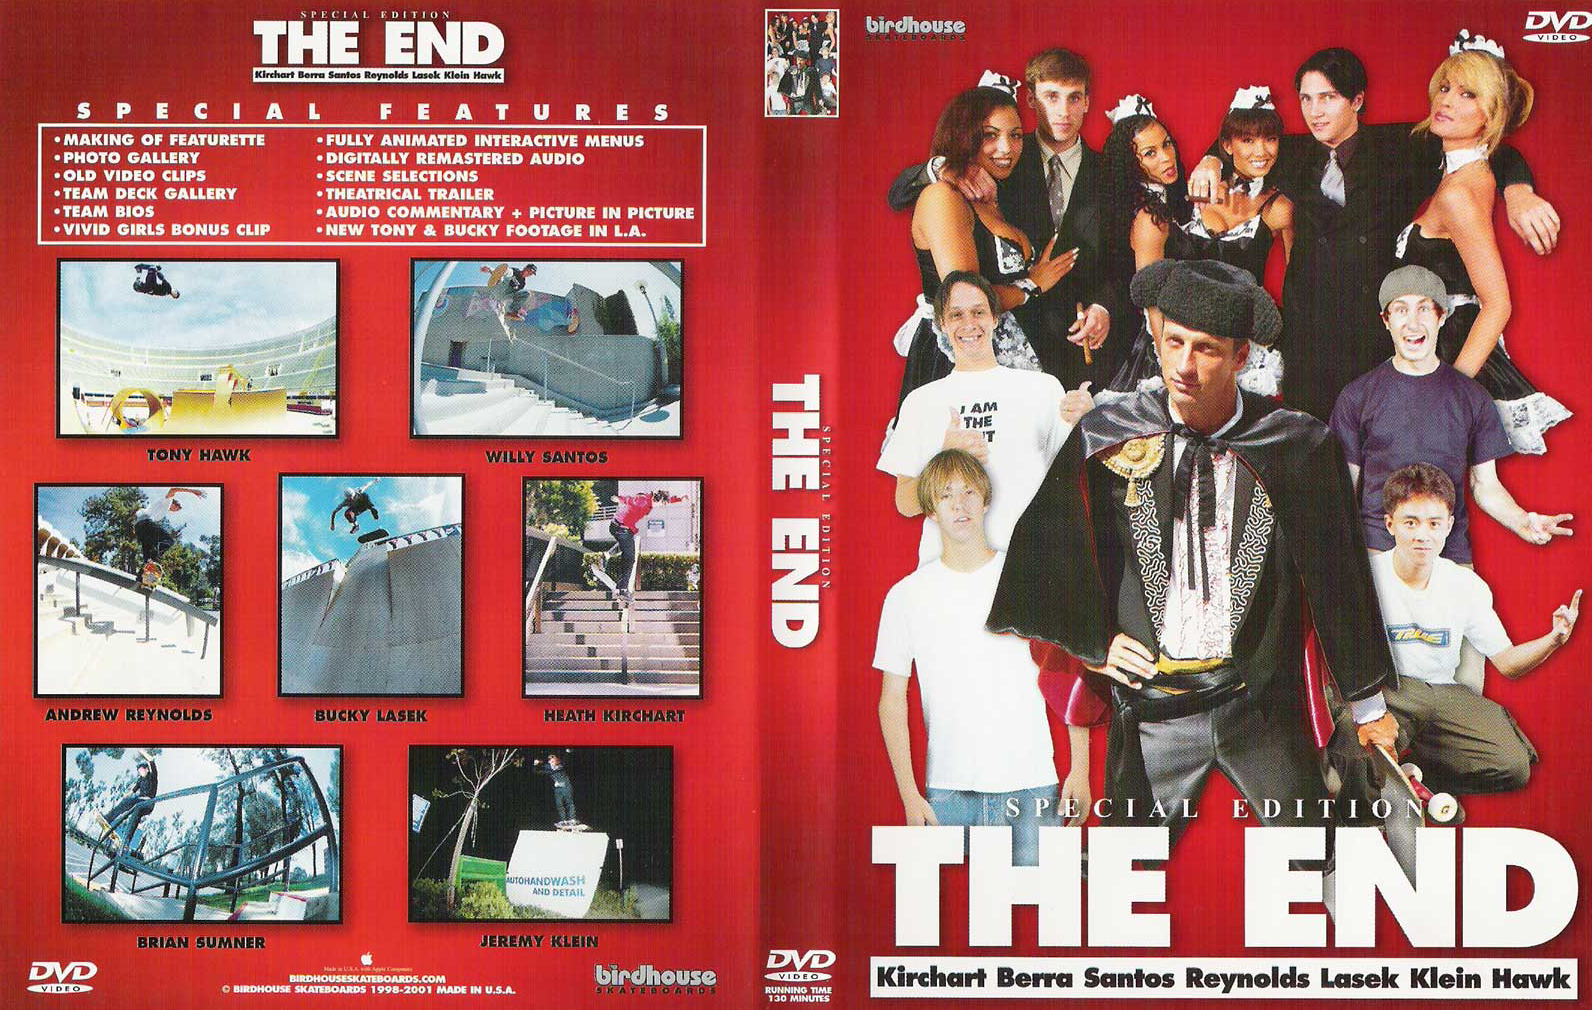 Birdhouse - The End feature image